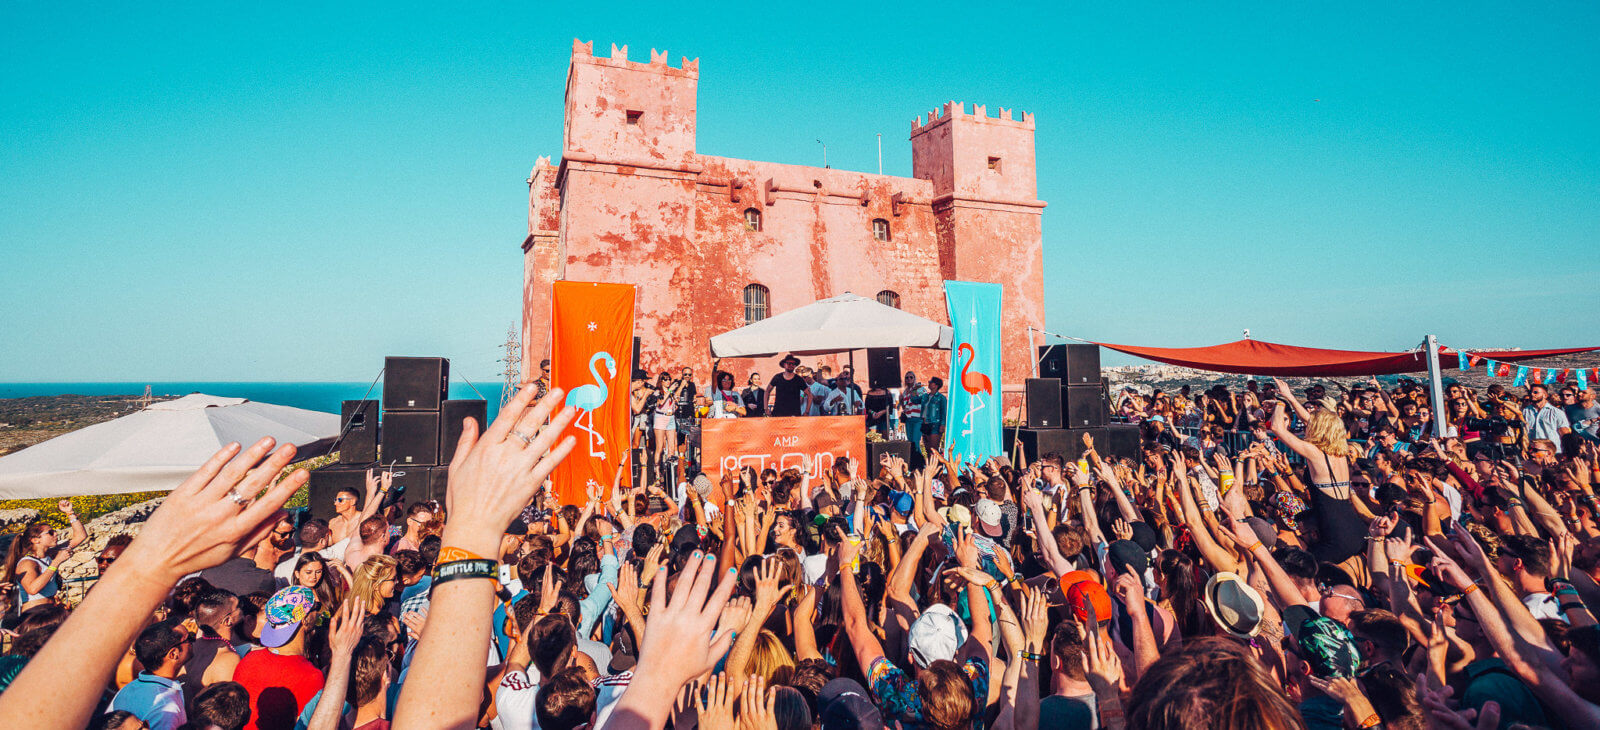 Lost and Found Festival with the Red Tower as a backdrop